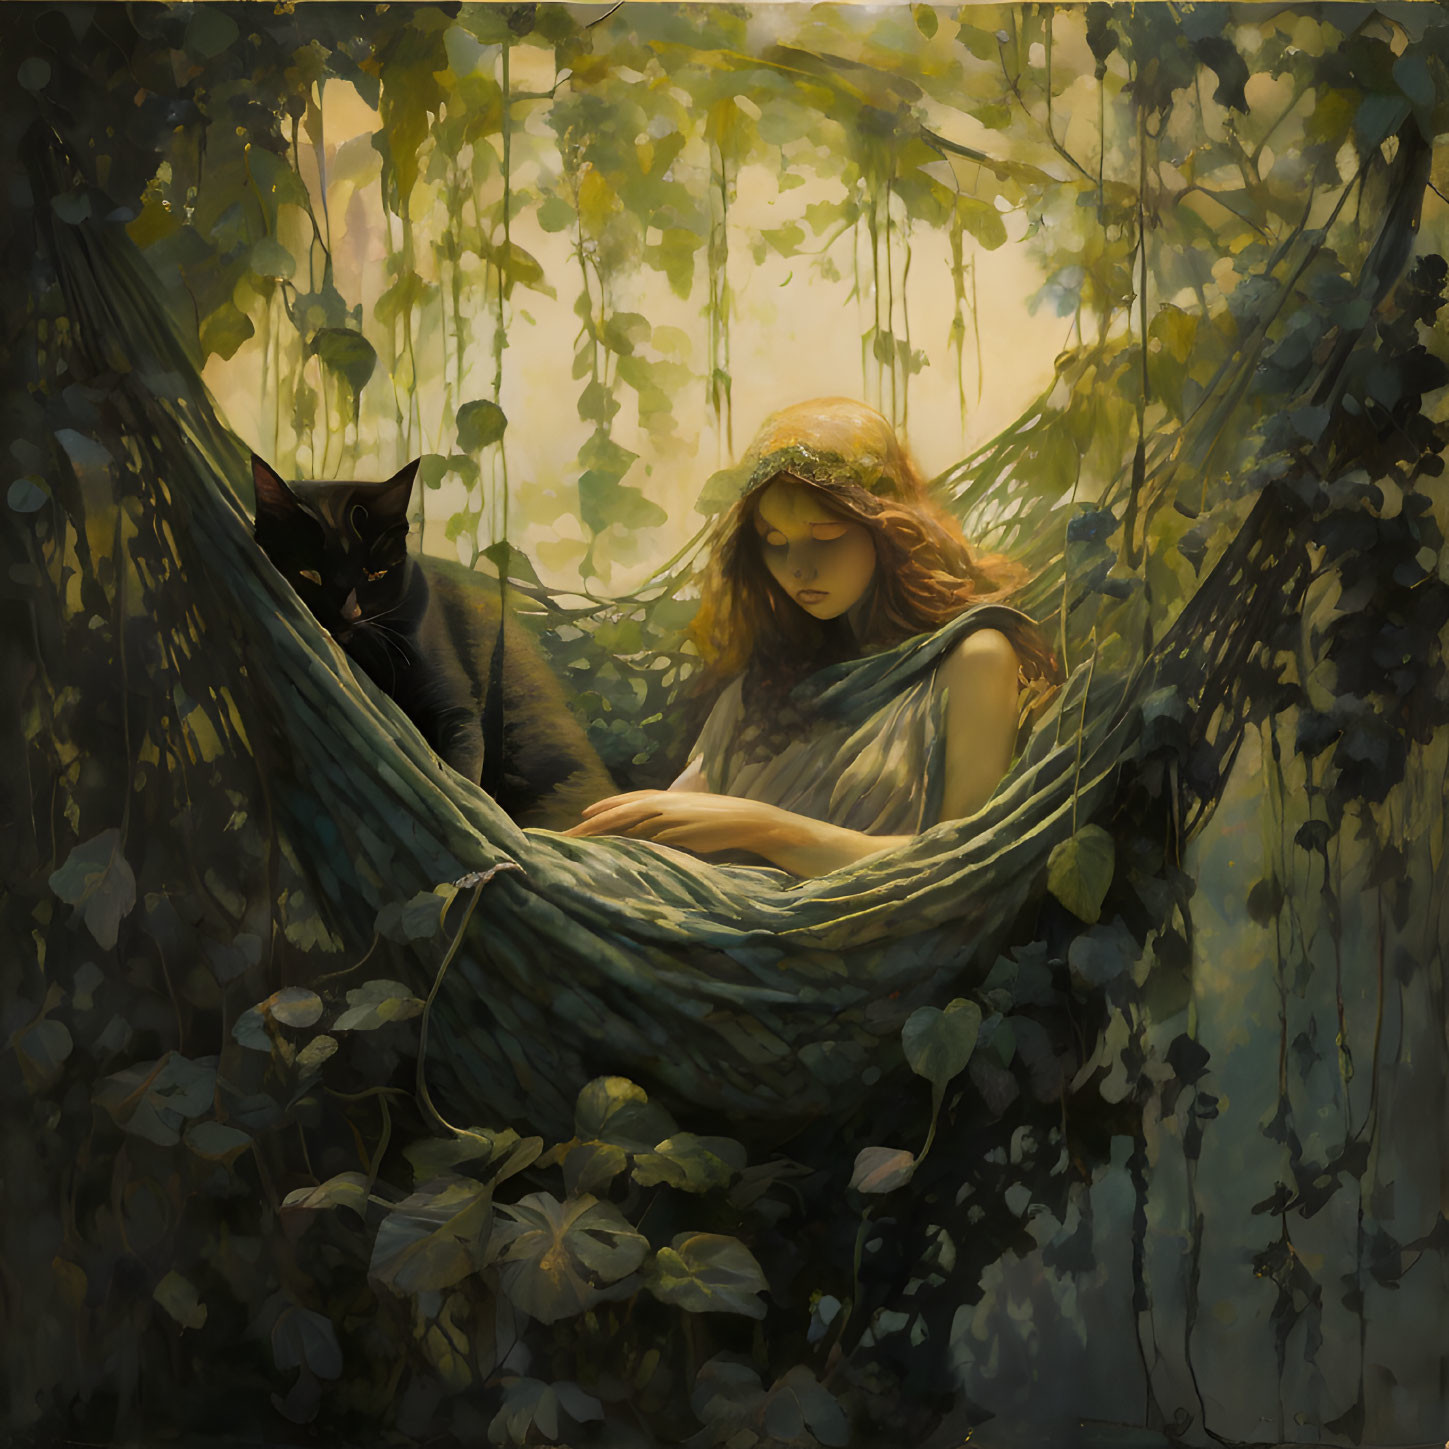 Red-haired woman and black cat in lush green hammock scene